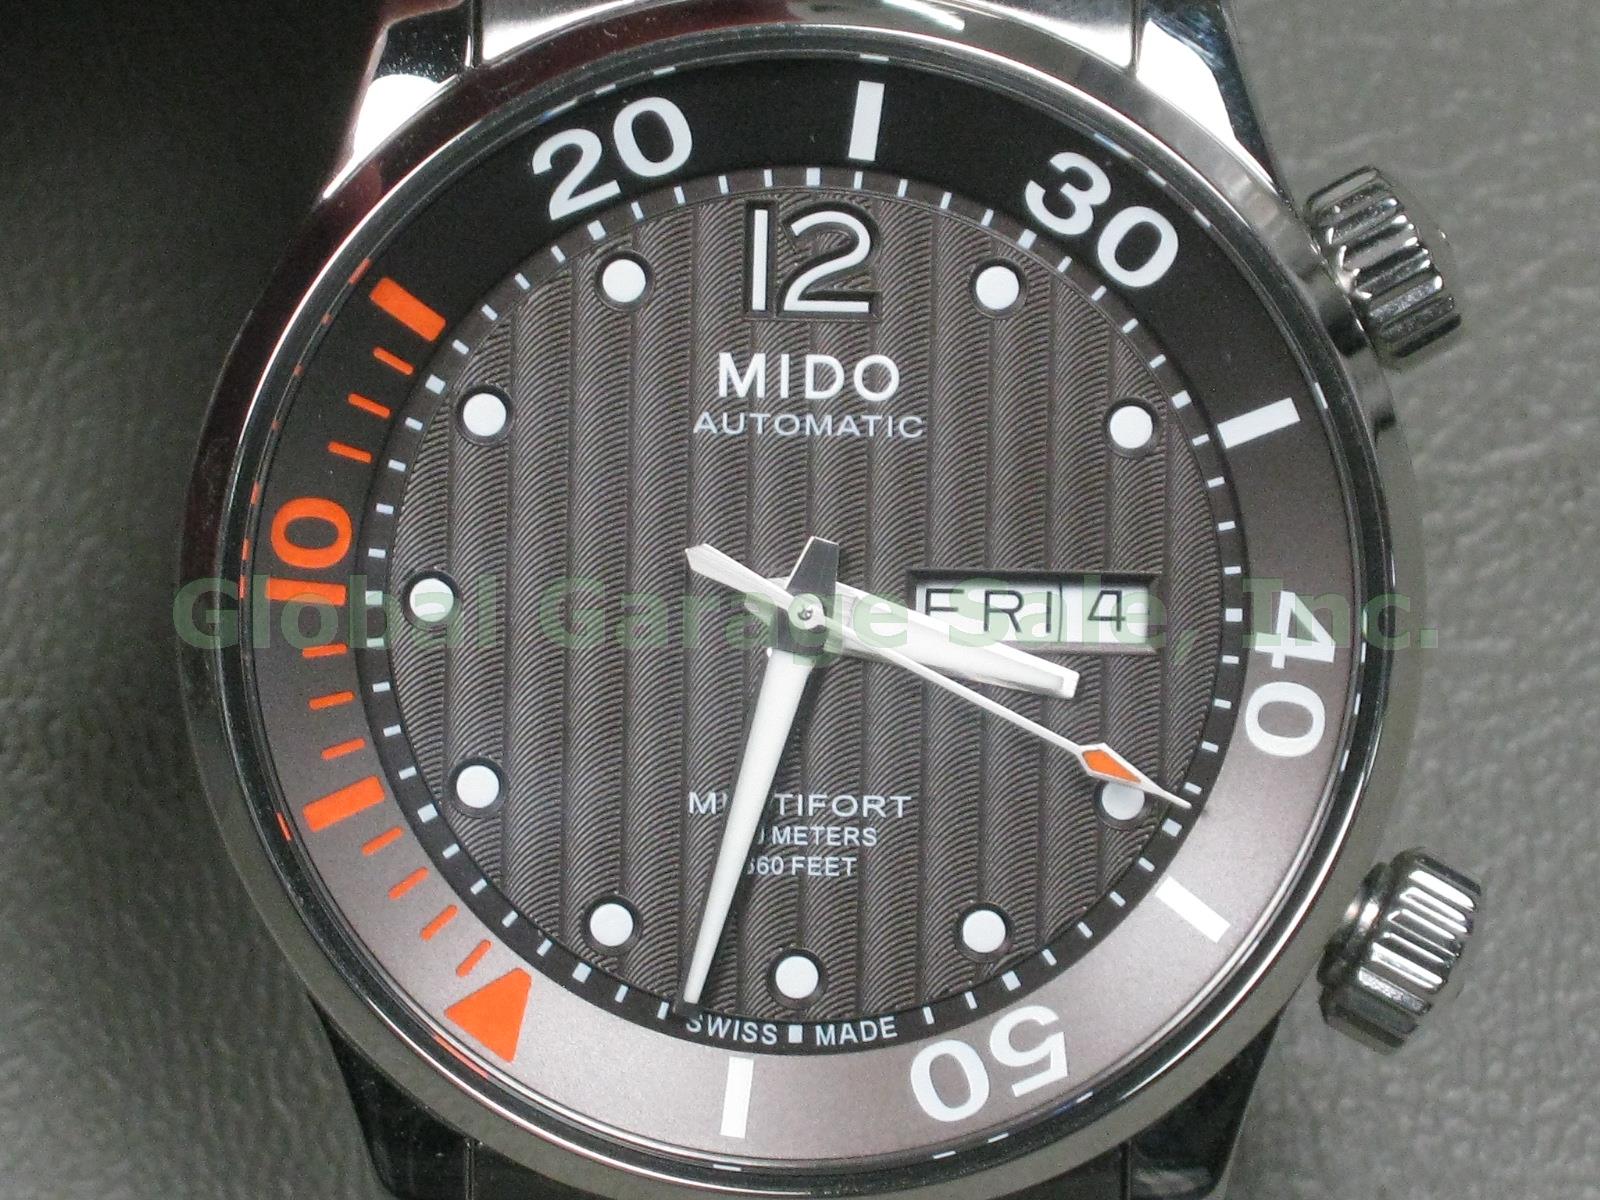 Mido Multifort M005930 A 42mm Two Crown Automatic 200M Swiss Diver Watch W/ Box+ 5